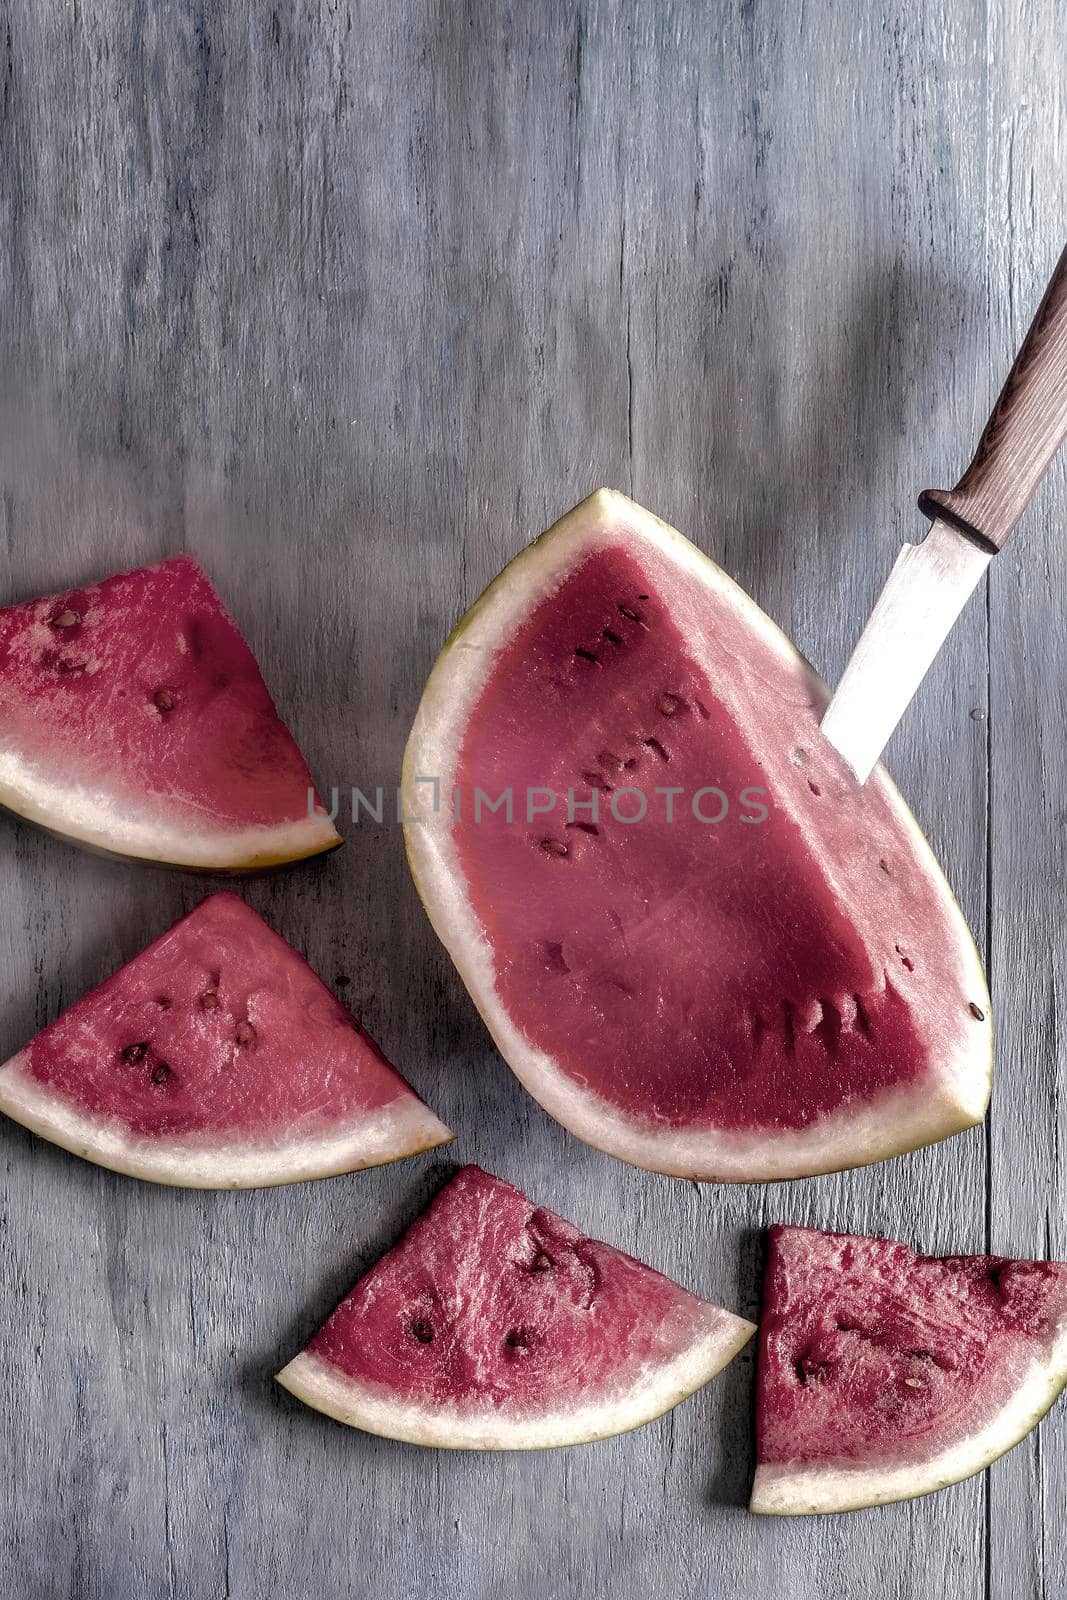 Sliced watermelon slices are lying on the wooden surface of the table. Top view, close-up, copy space